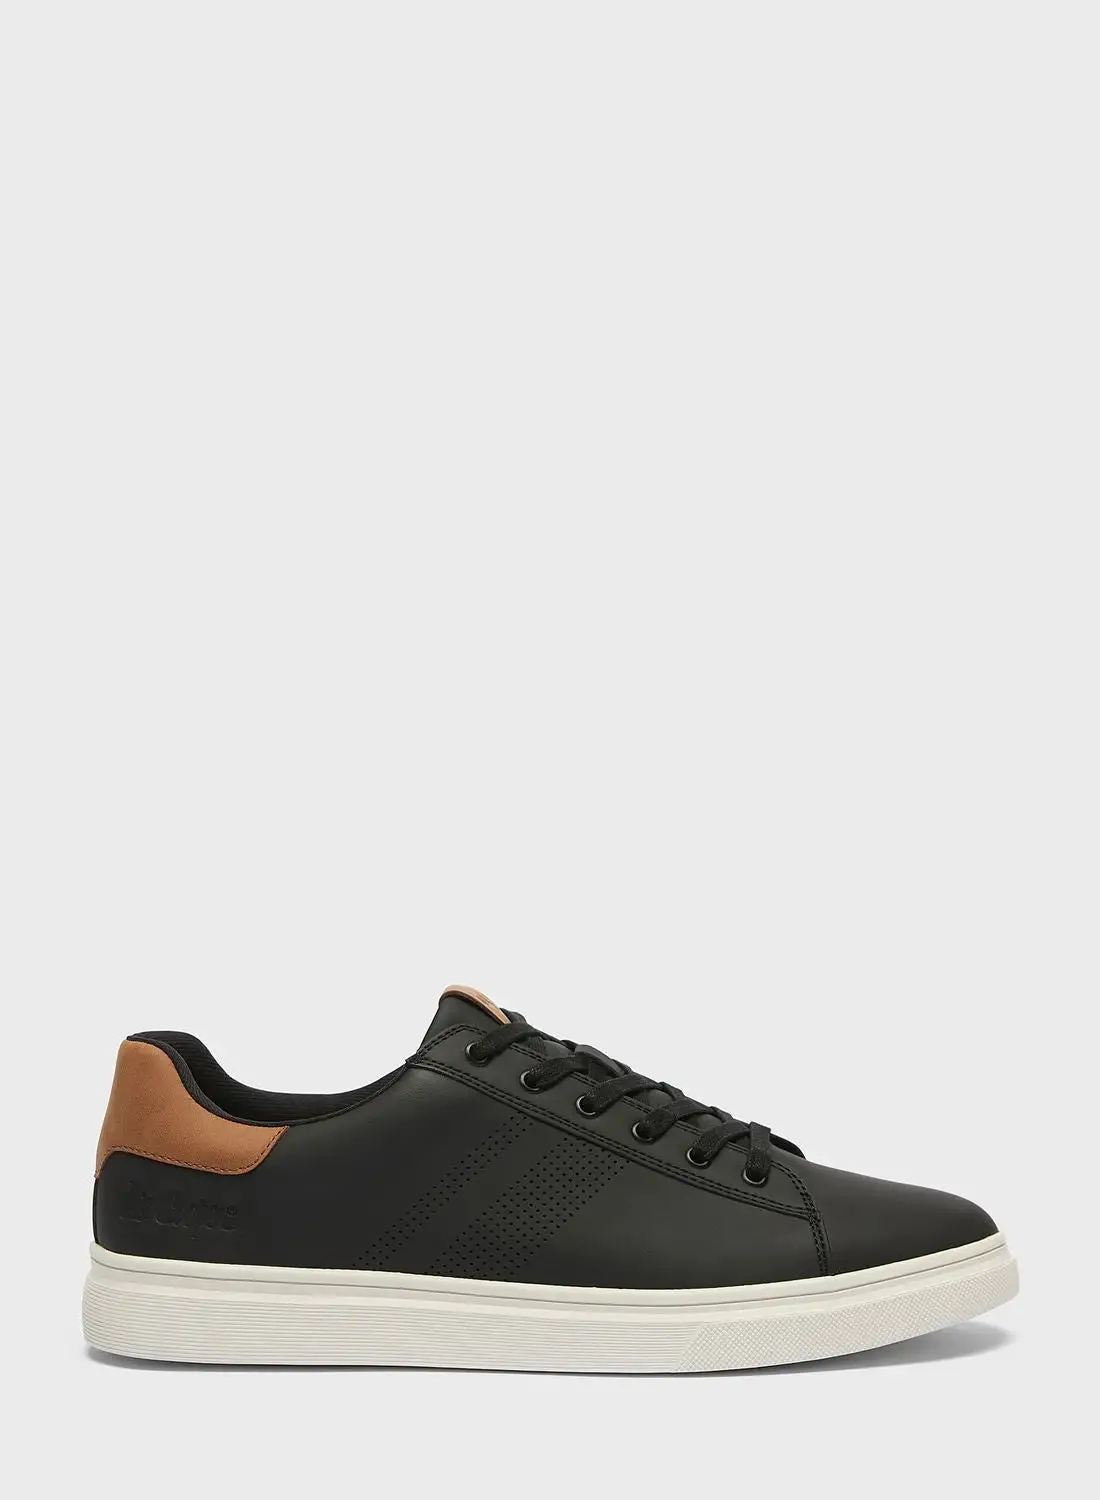 Lee Cooper Casual Lace Up Sneakers